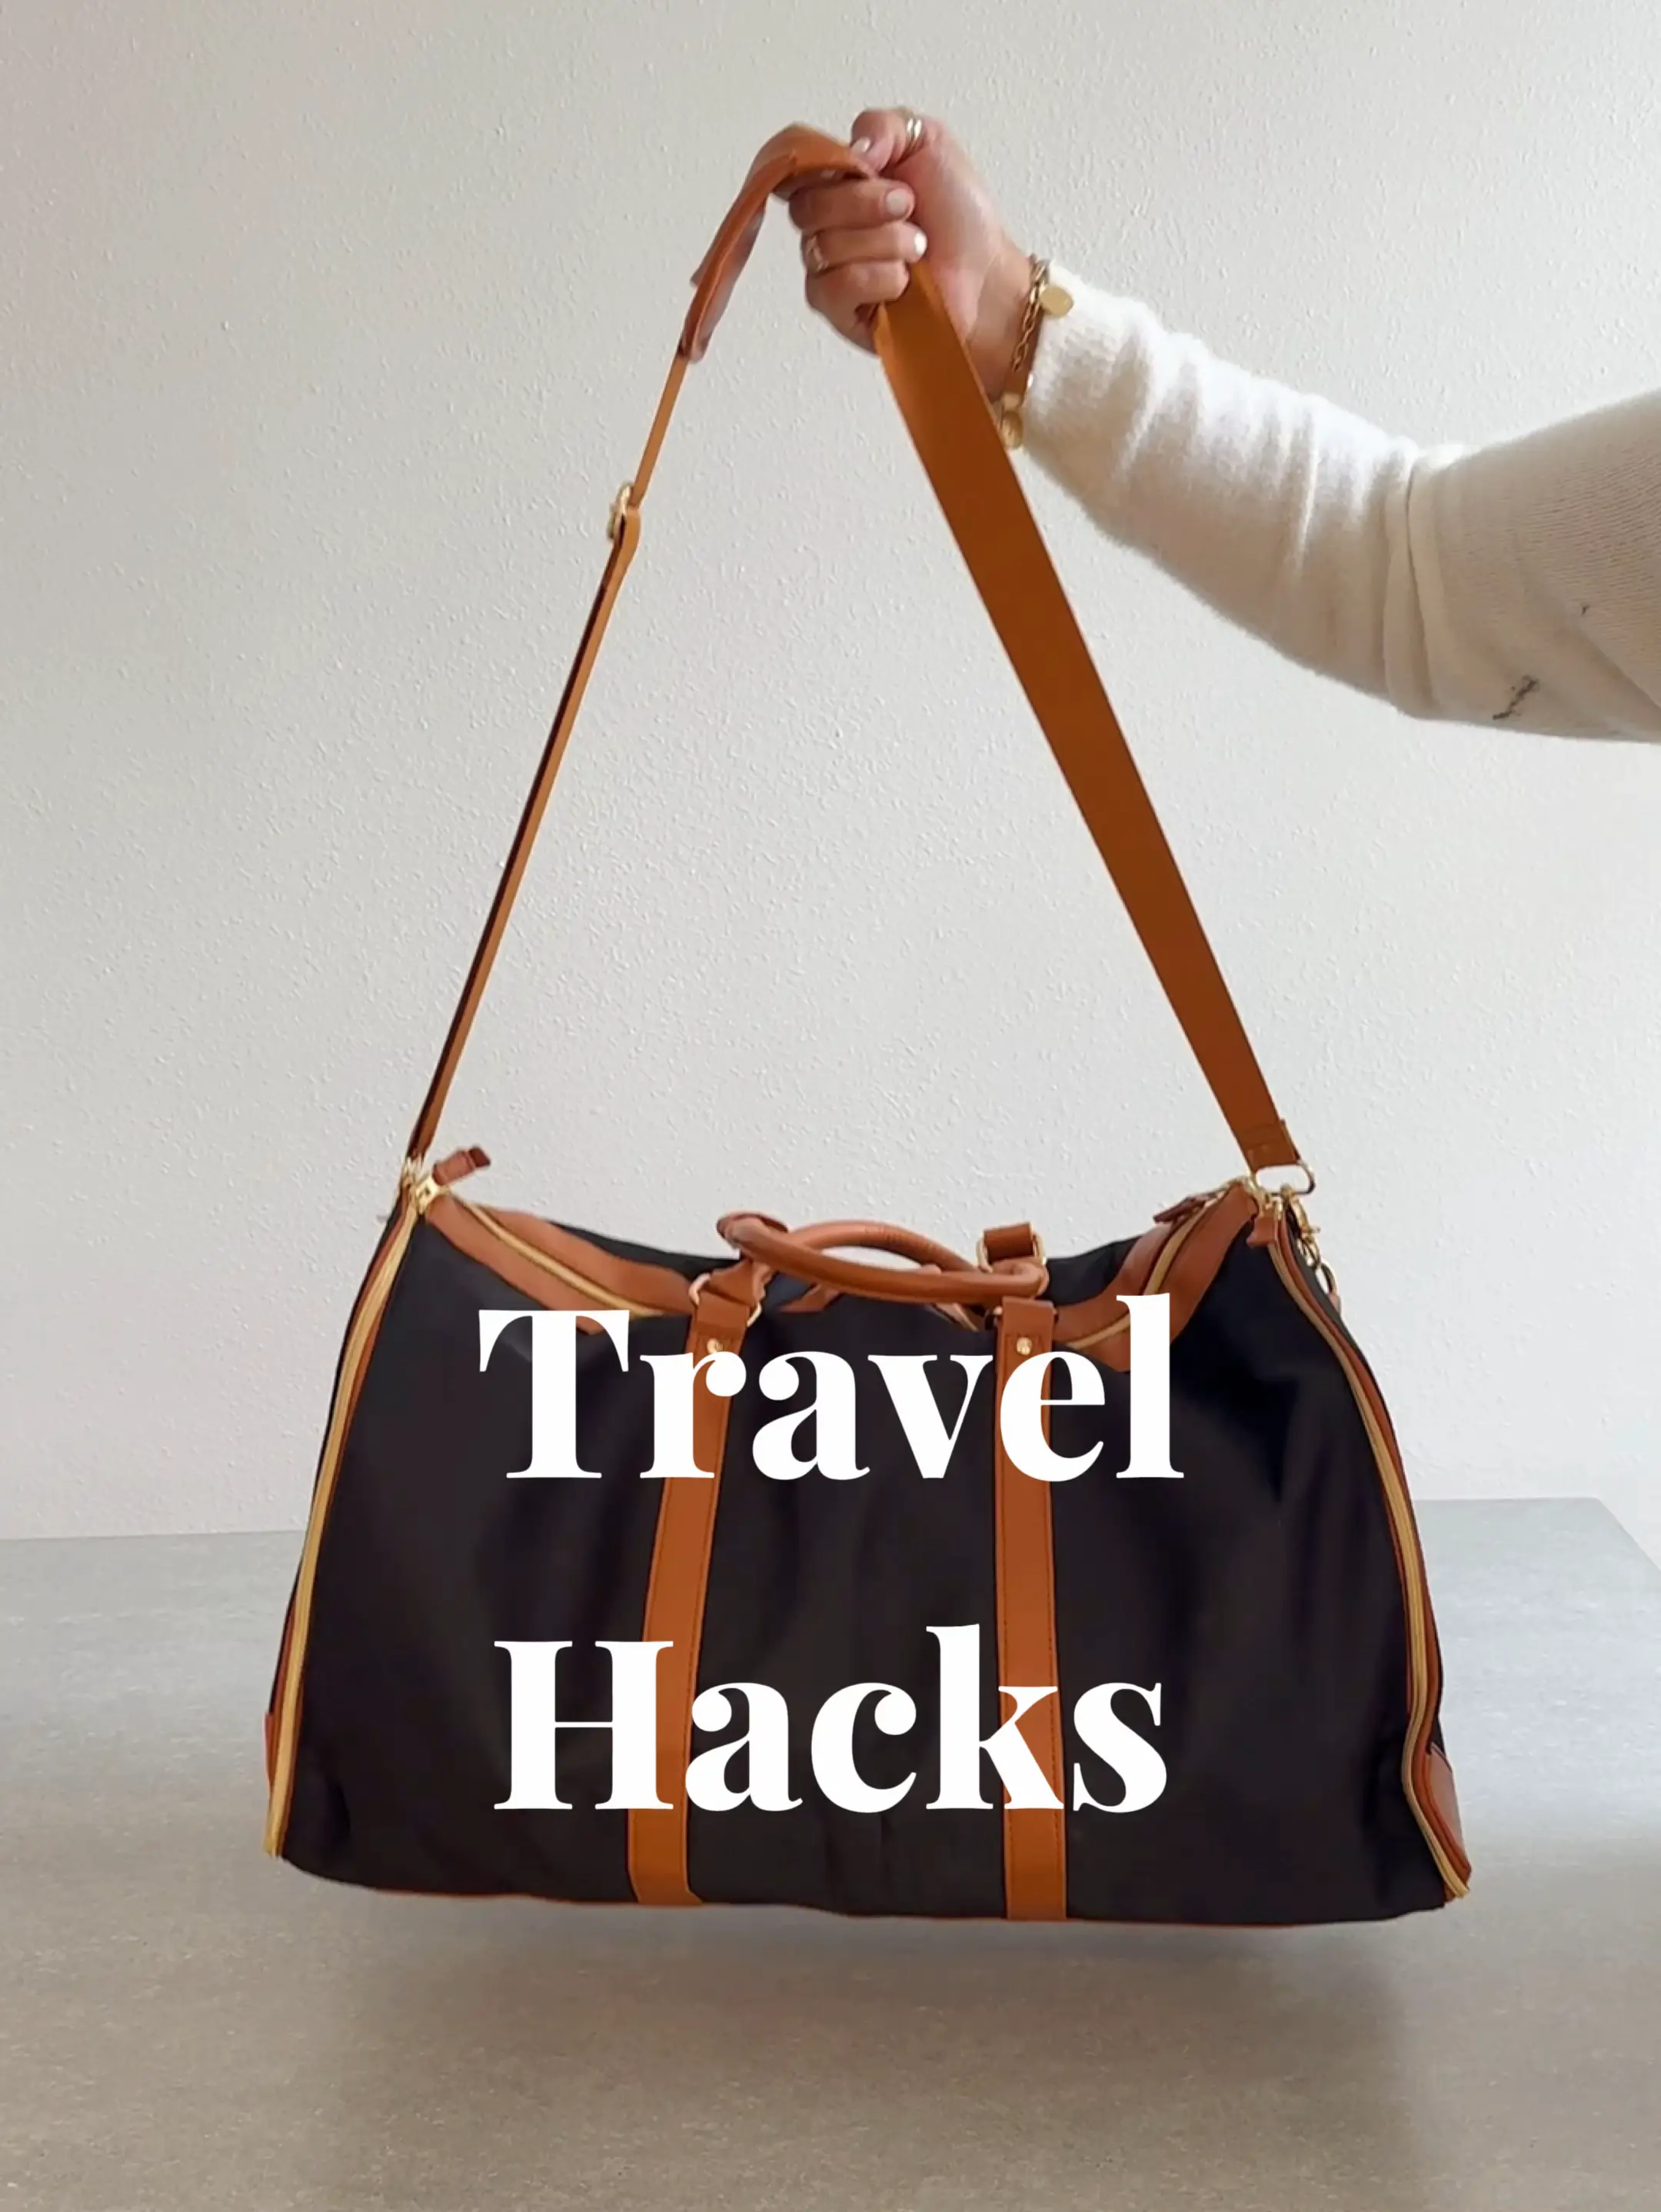 Travel hacks ✈️, Video published by HouseofSequins